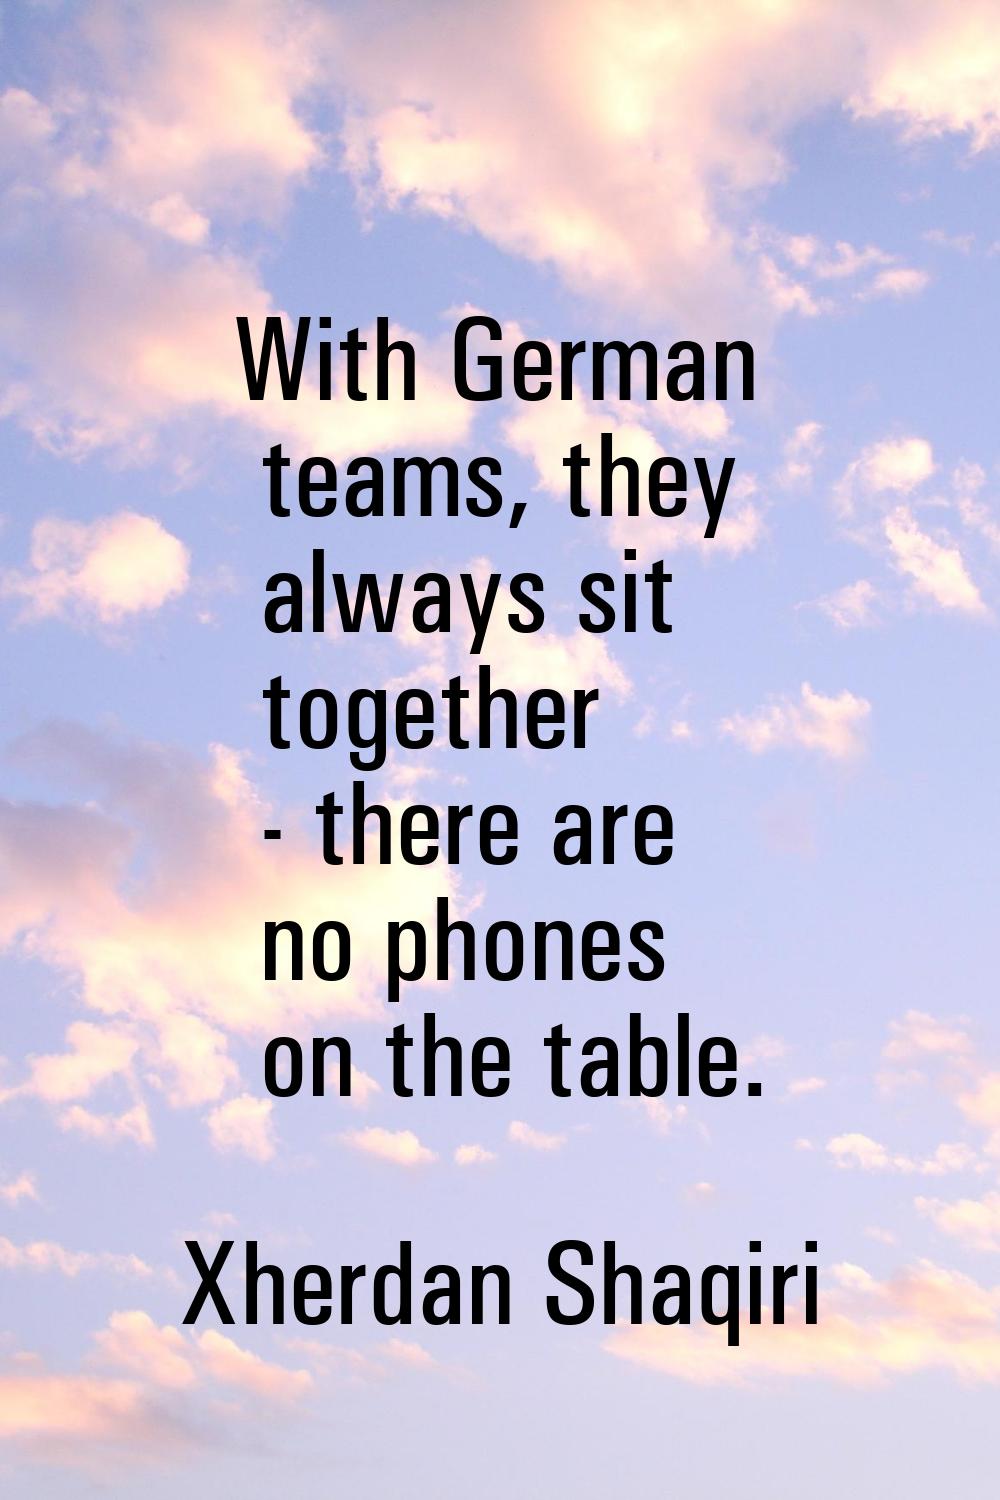 With German teams, they always sit together - there are no phones on the table.